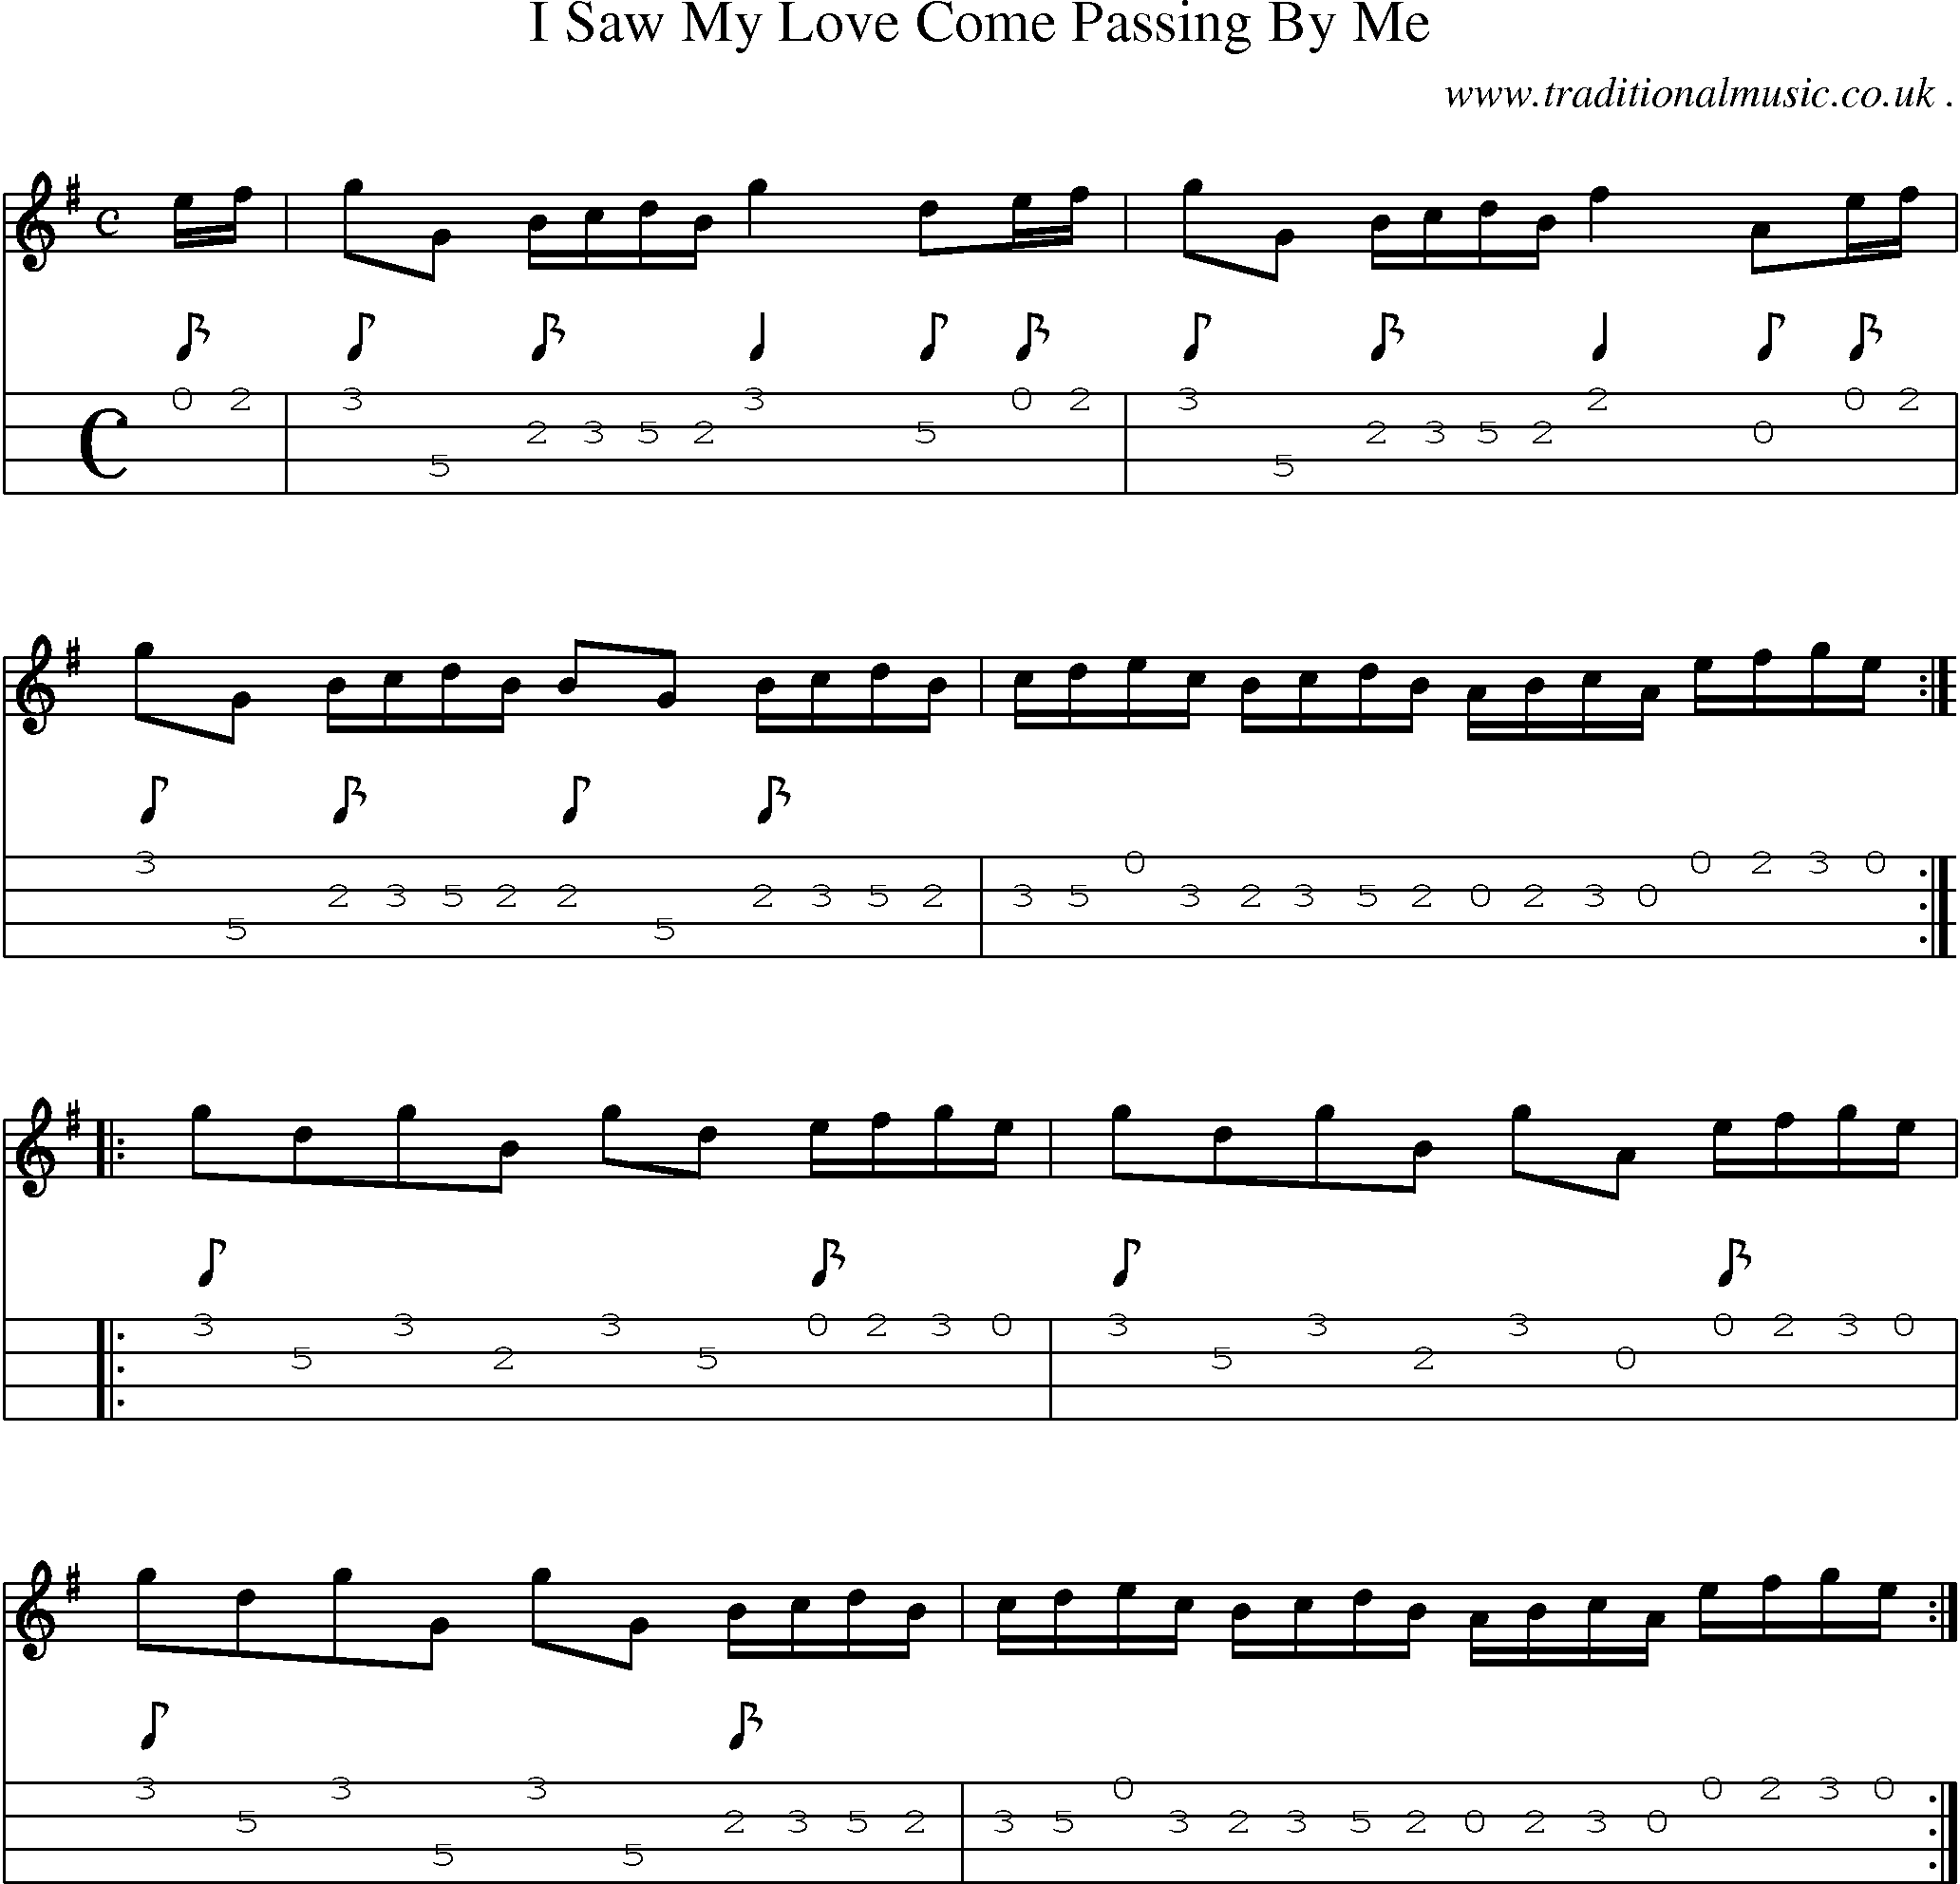 Sheet-Music and Mandolin Tabs for I Saw My Love Come Passing By Me